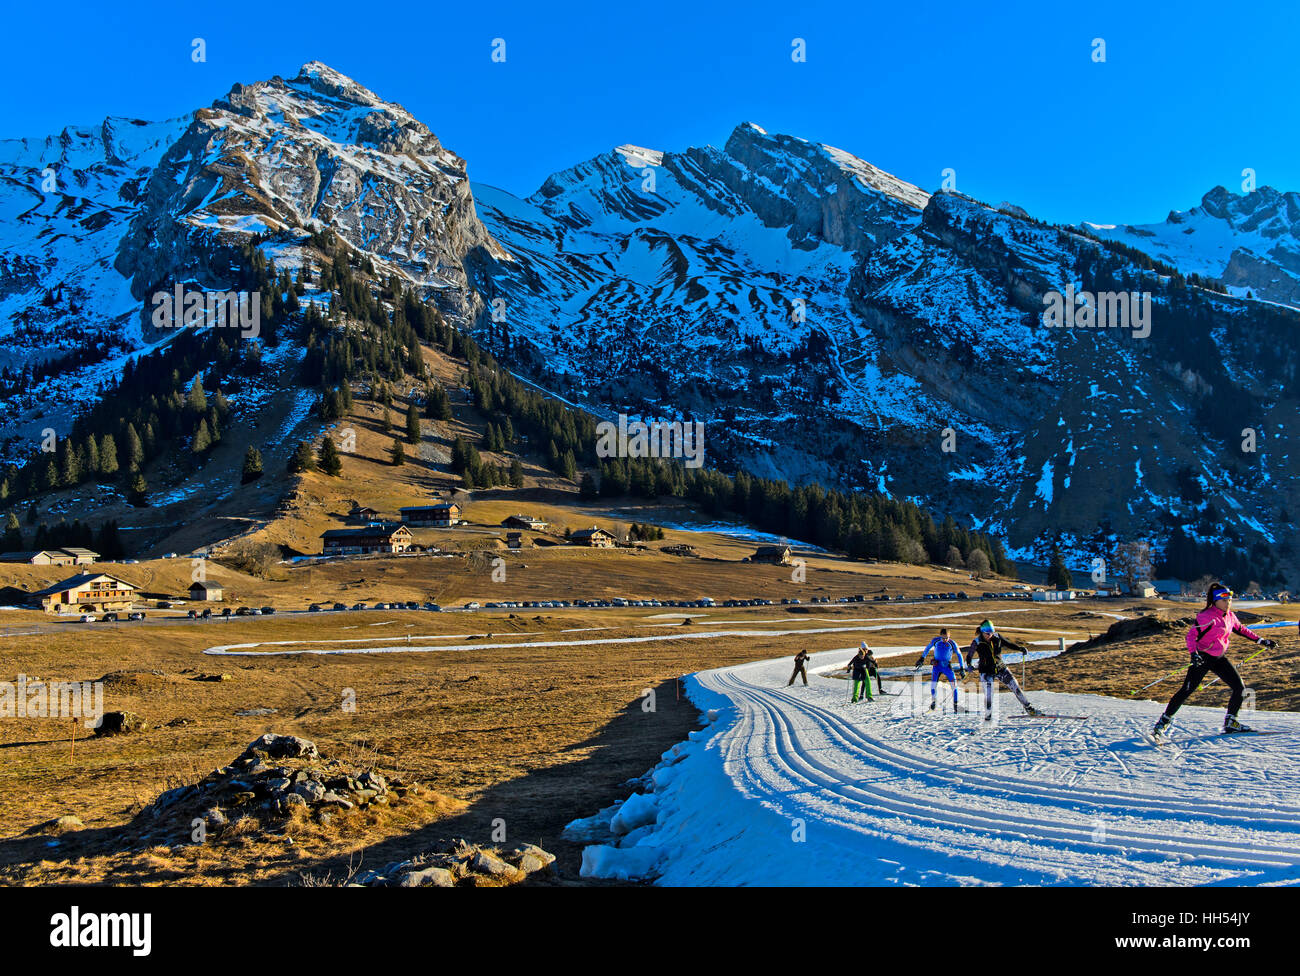 Cross-country skiers practicing on cross-country skiing runs of artificial snow, Espace Nordique des Confins at La Clusaz,France Stock Photo